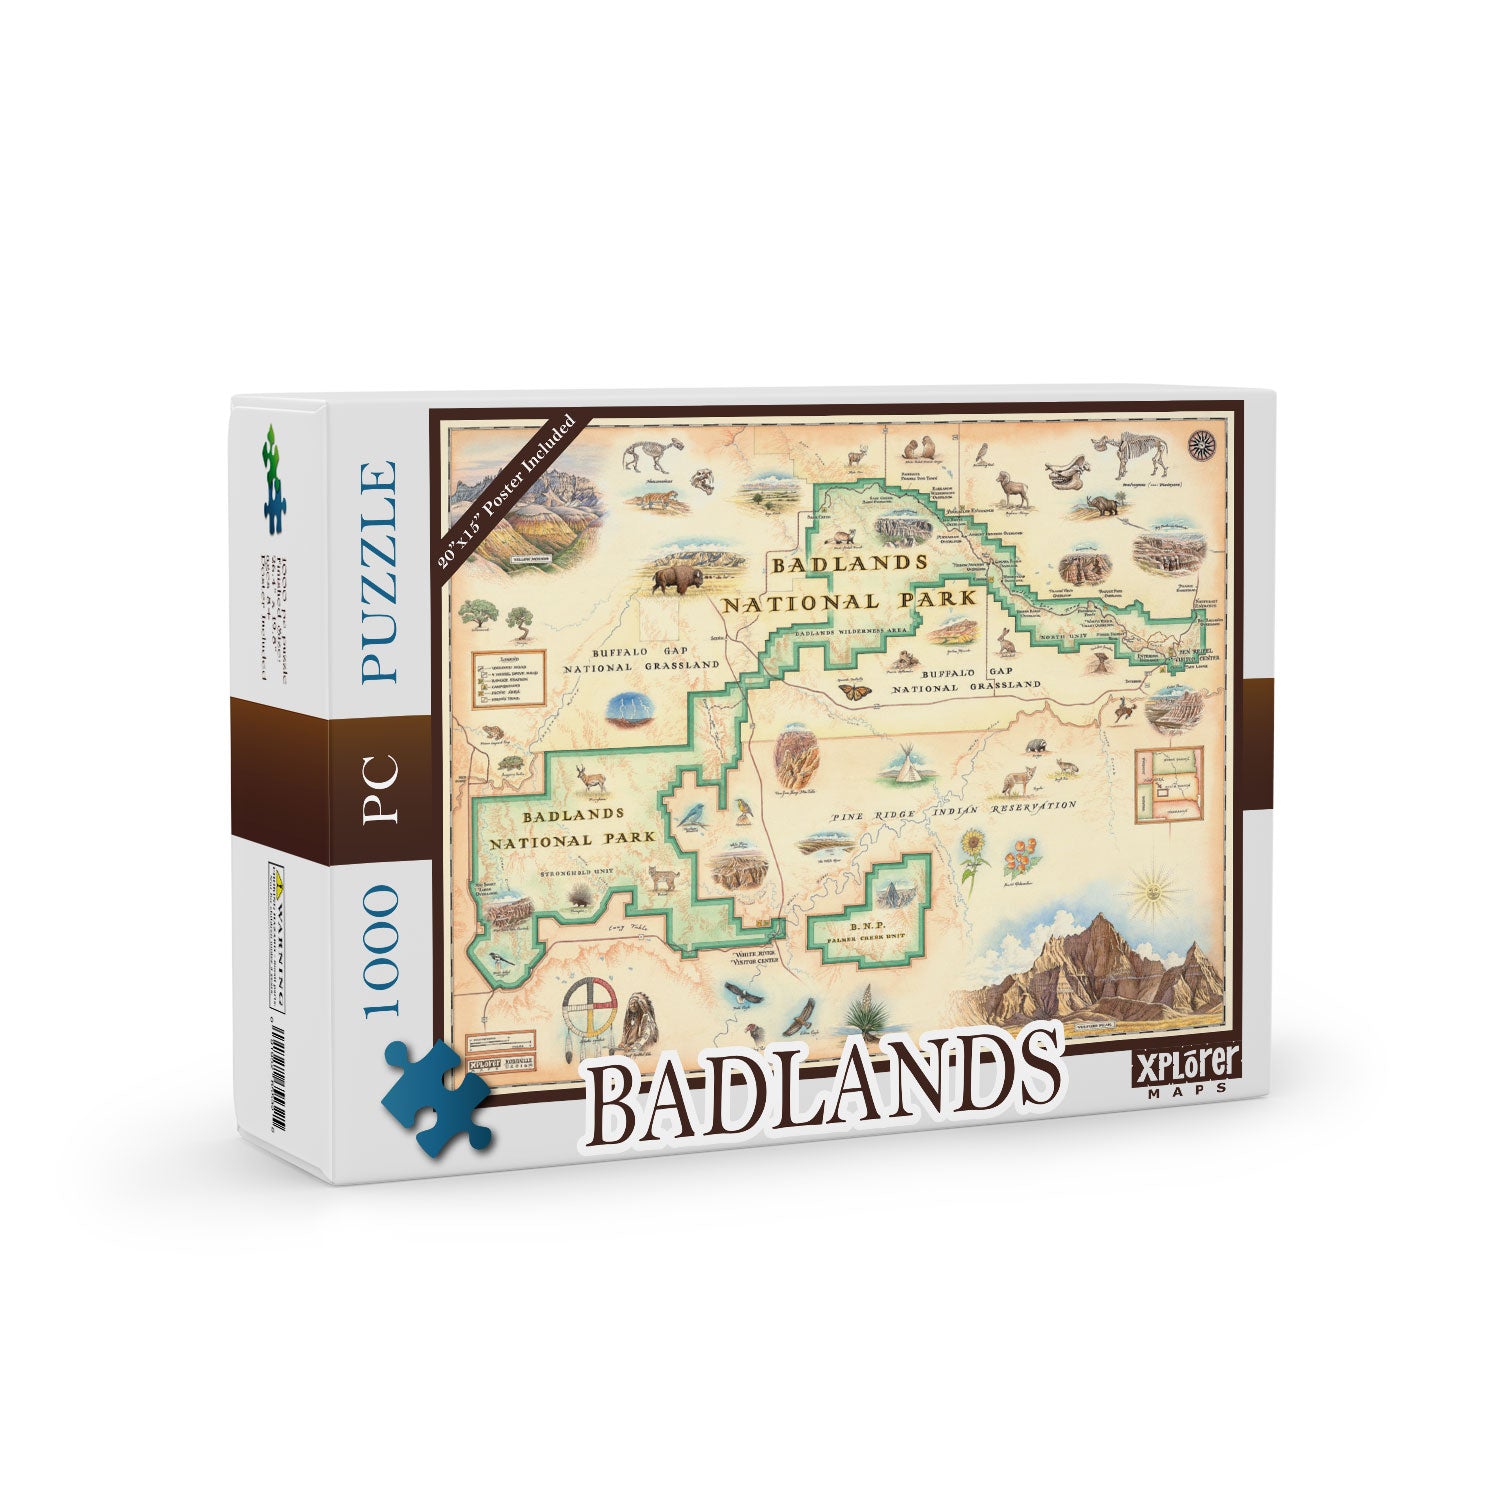 Badlands National Park map 1000-piece puzzle. Badlands National Park map 1000-piece puzzle. Featuring buffalo bison, dinosaurs, flowers, fox, sheep, and eagles, as well as an illustration of Vulture Peak. 